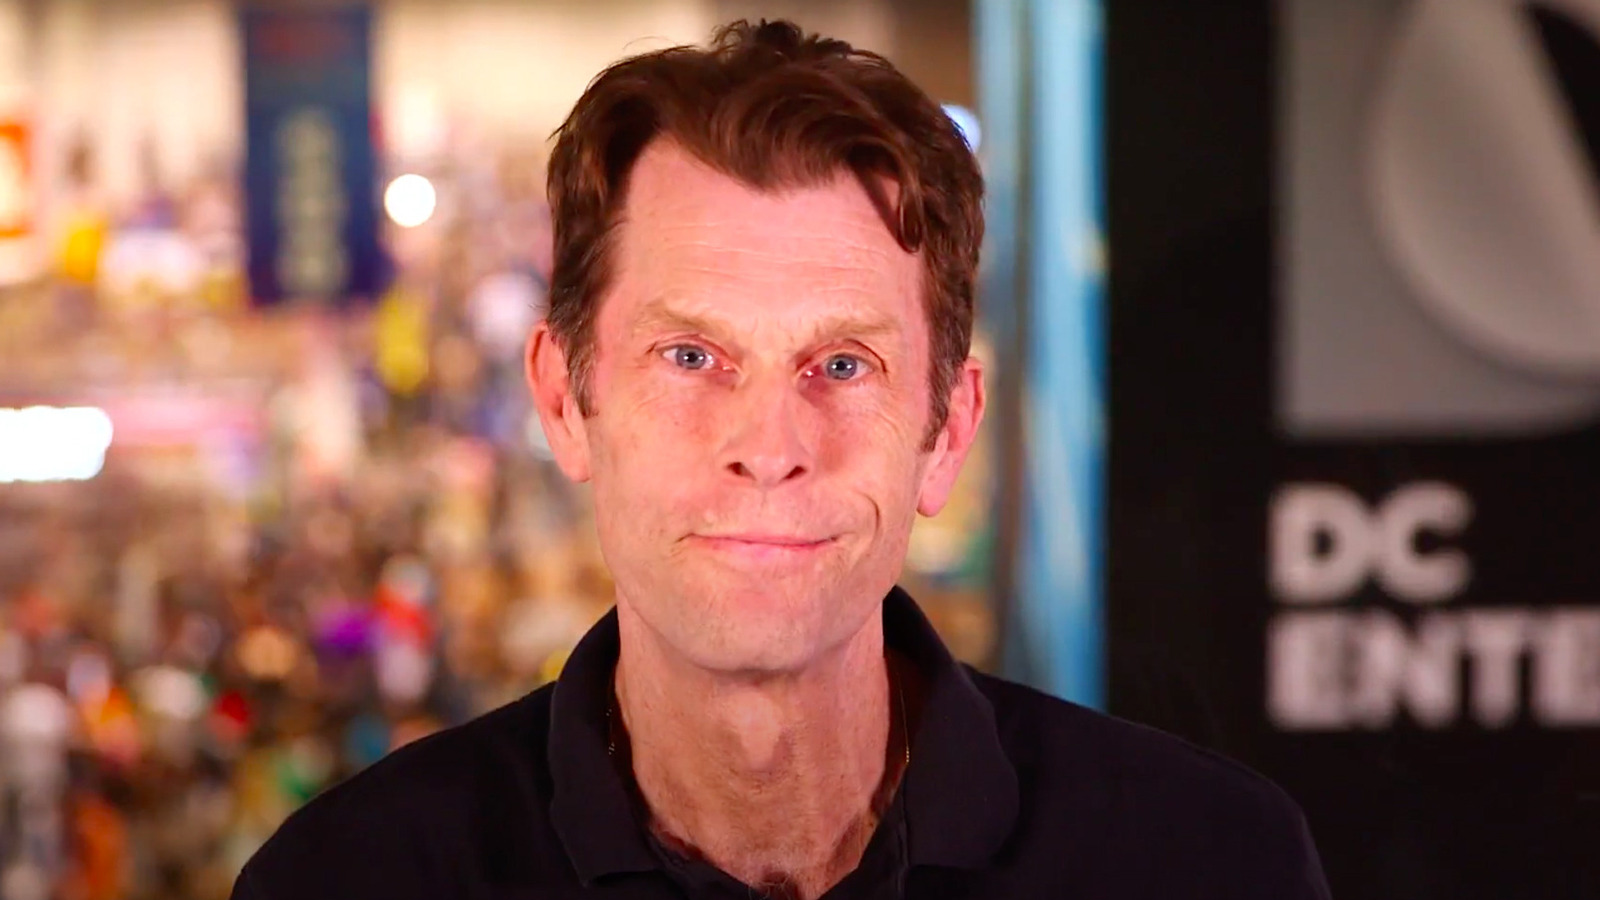 How Kevin Conroy Brought Some Much Needed Joy To 9 11 First Responders